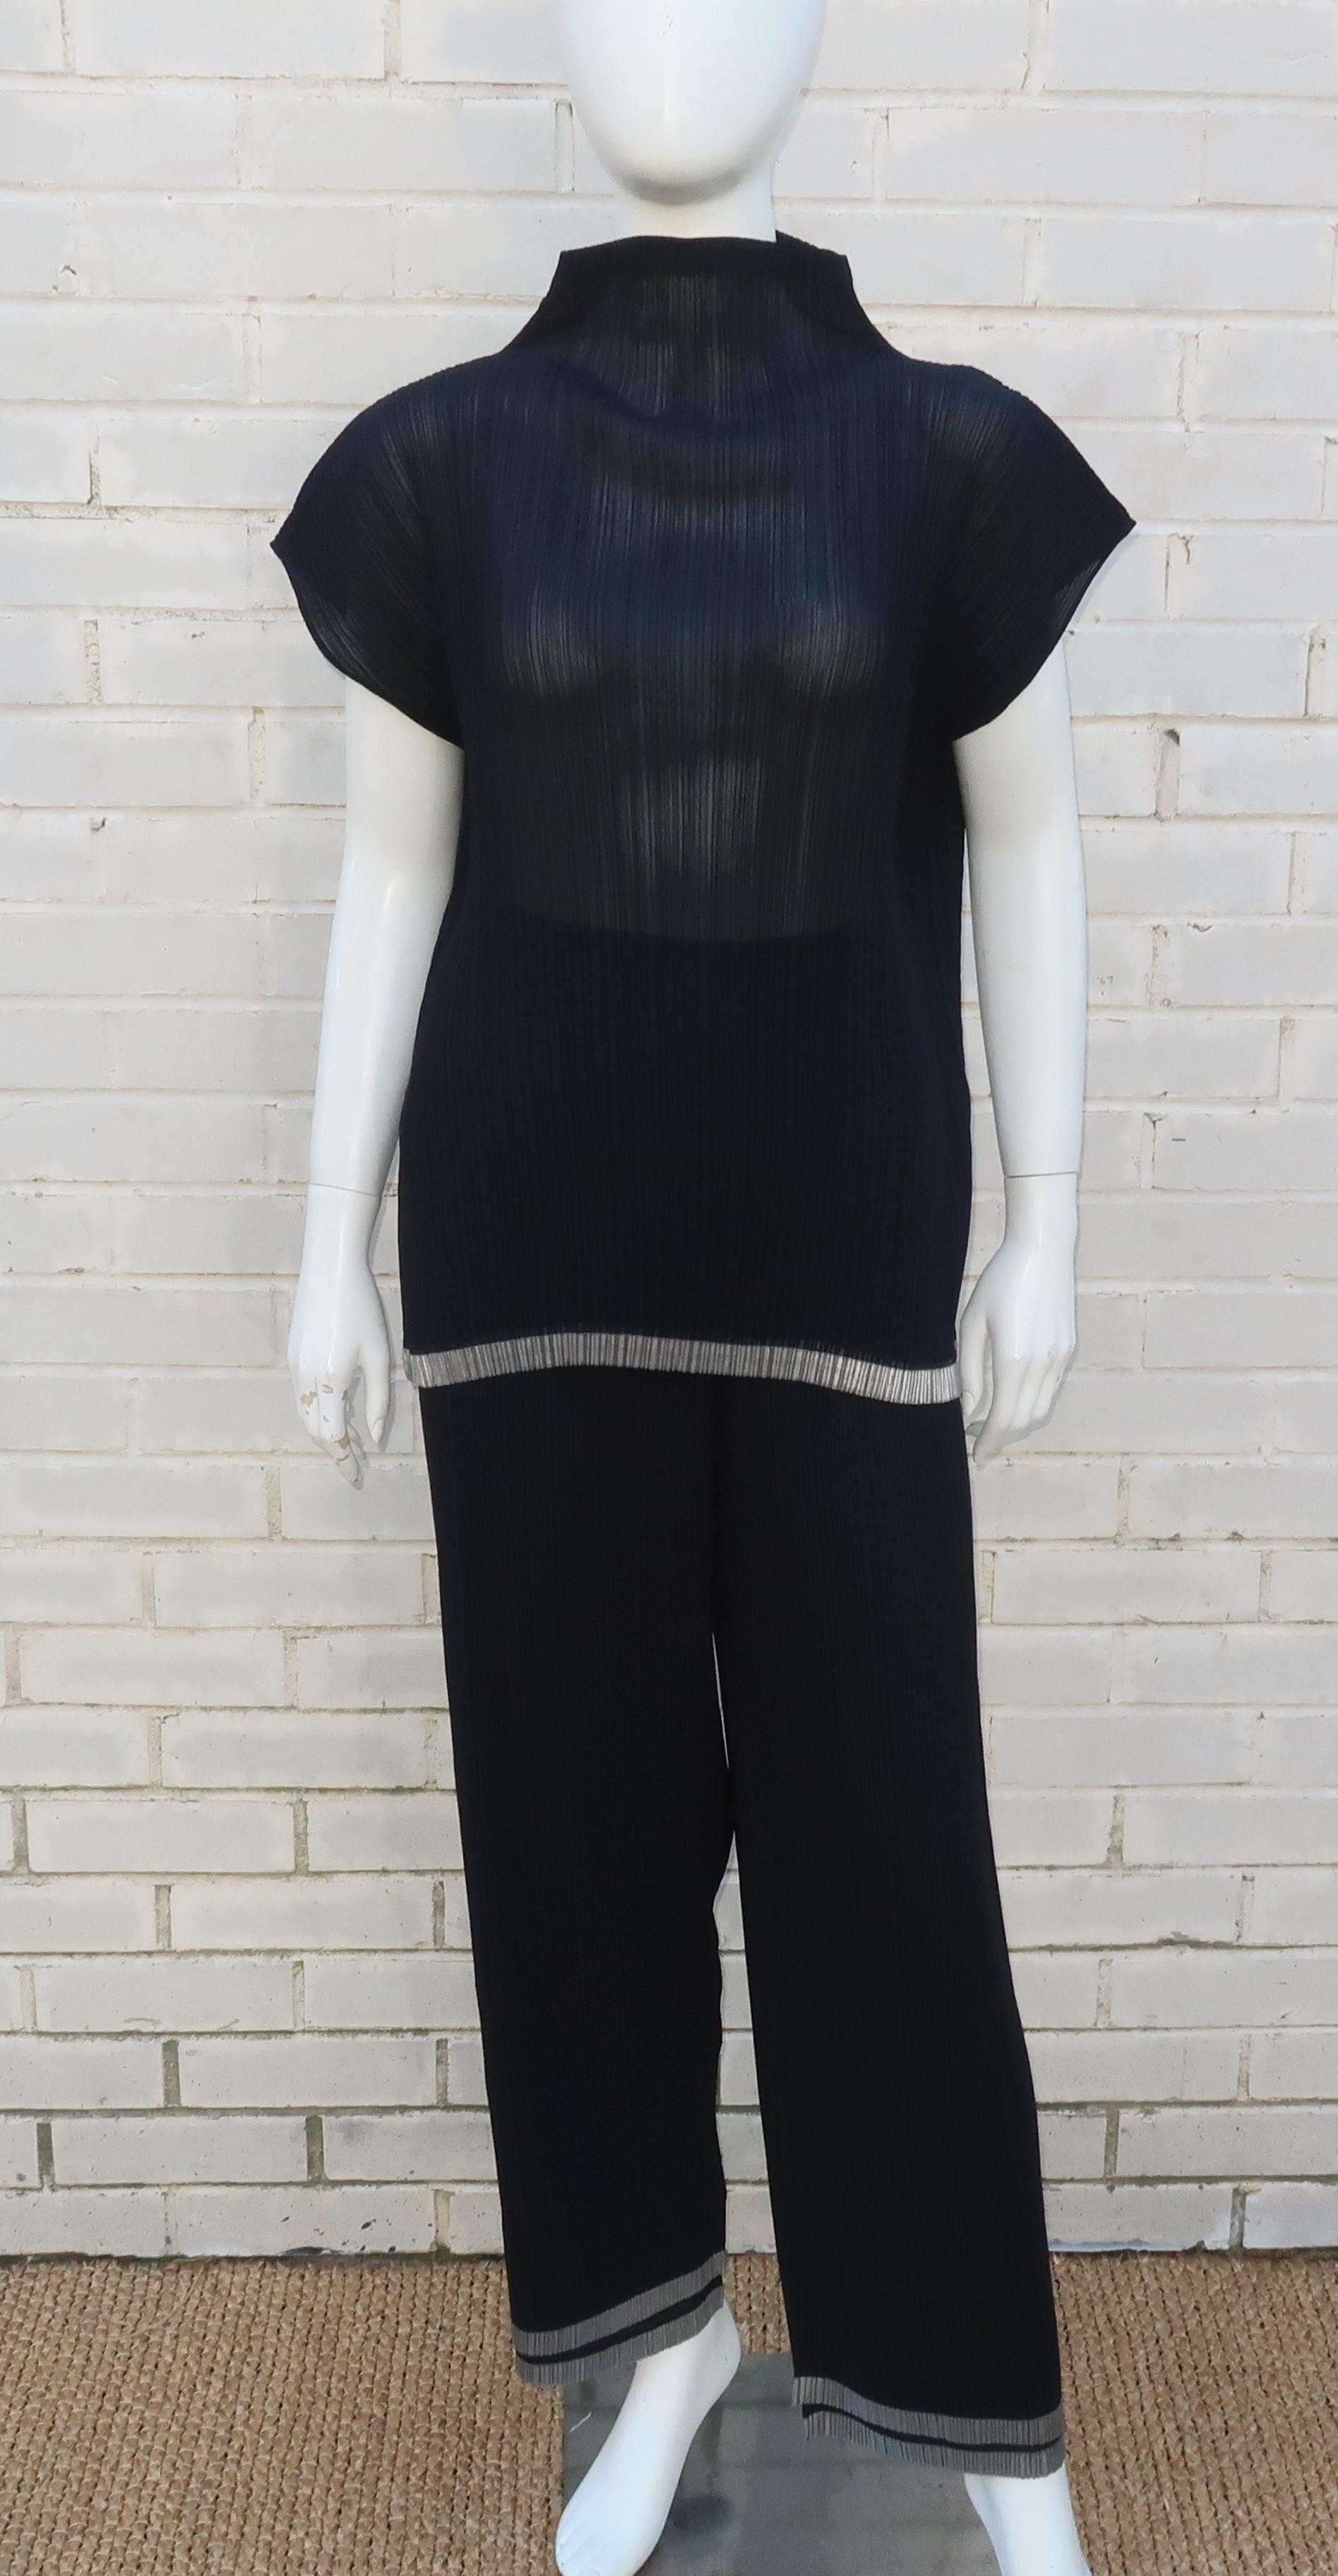 Issey Miyake's designs are the modernist Japanese version of Mario Fortuny's pleated Delphos gowns with attention paid to both the human form and ease of movement.  This three piece ensemble consists of a pullover top, elasticized waist two tier